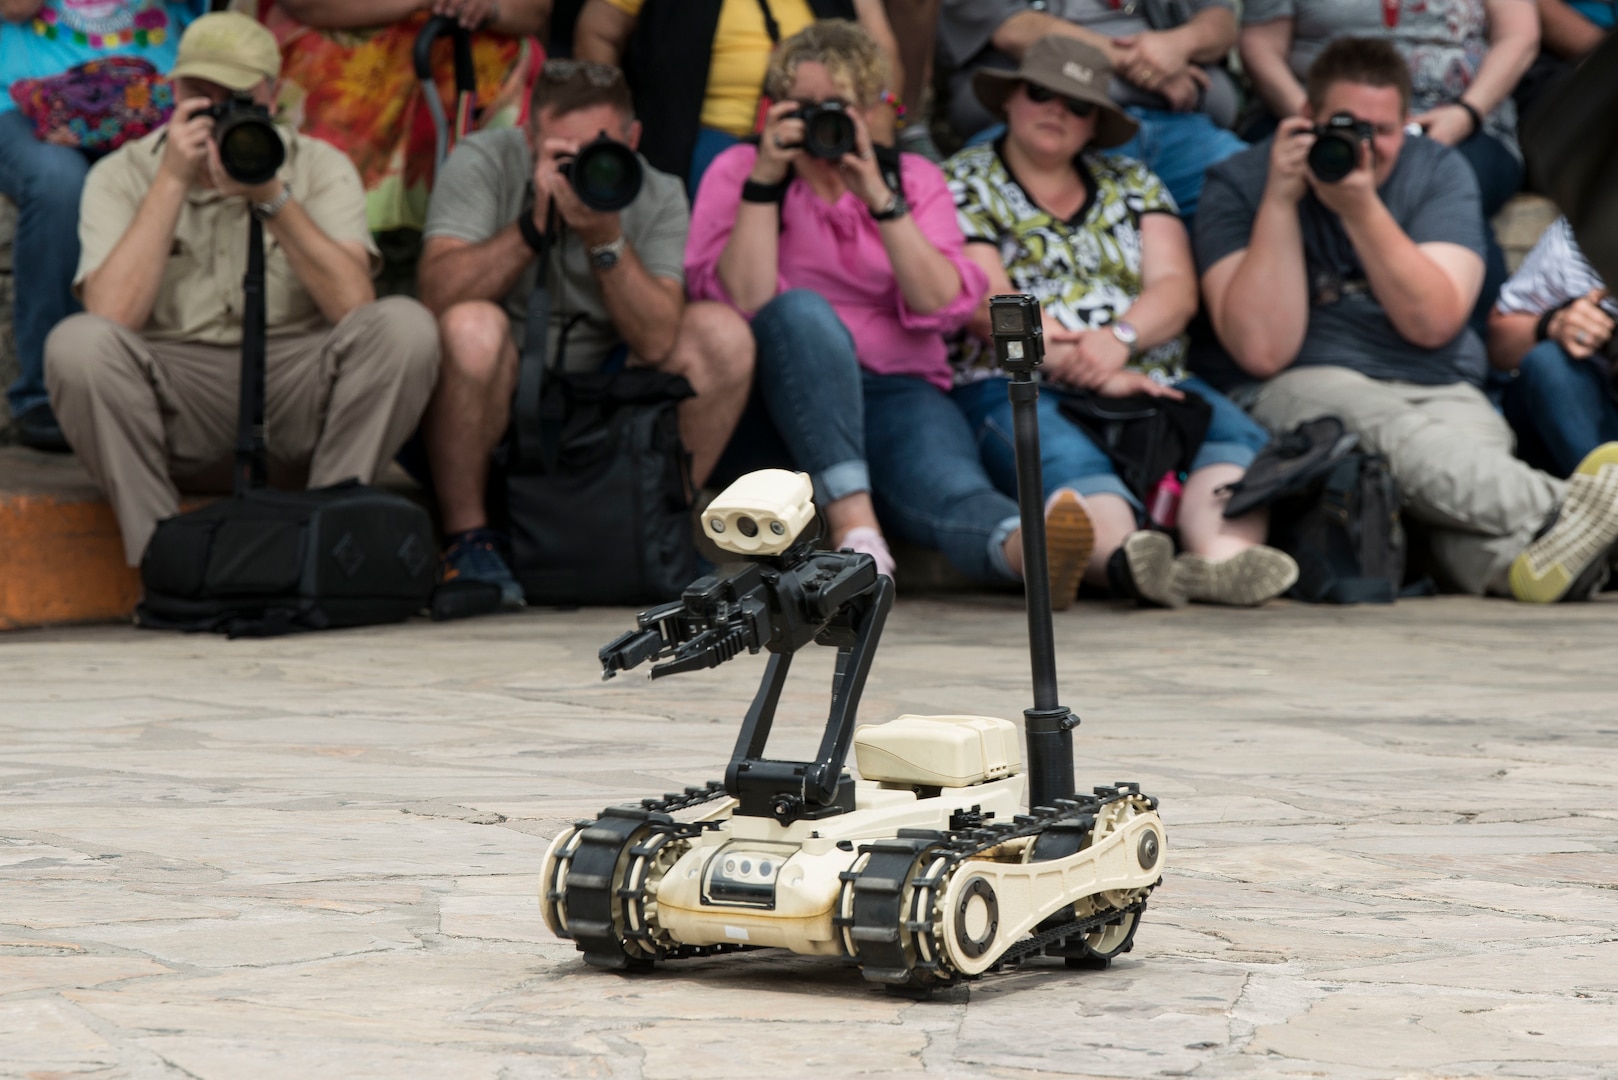 A robot used by the 502nd Civil Engineer Squadron, Explosive Ordnance Disposal, moves in front the audience during equipment and methods for bomb detection and disposal demonstration during San Antonio’s Fiesta Air Force Day at the Alamo, April 22, 2019. From its beginning in 1891, Fiesta has grown into an annual celebration that includes civic and military observances, street and river parades, exhibits, pilgrimages and memorials.